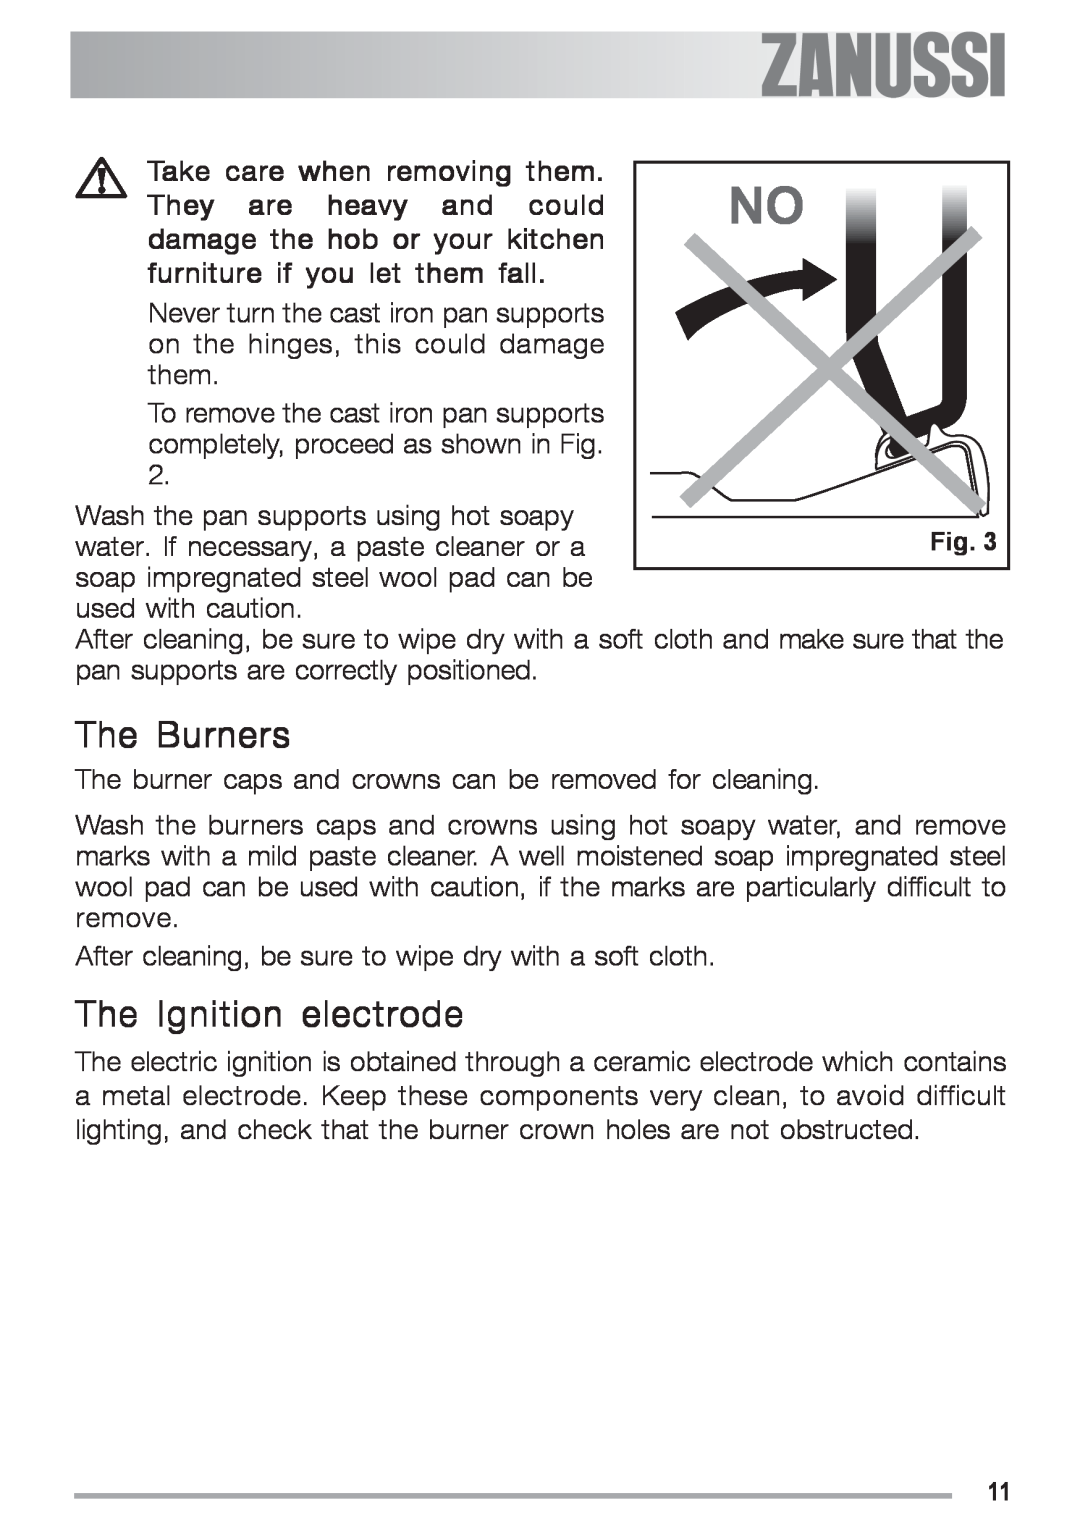 Zanussi ZGF 692 CT manual The Burners, The Ignition electrode, Take care when removing them, furniture if you let them fall 